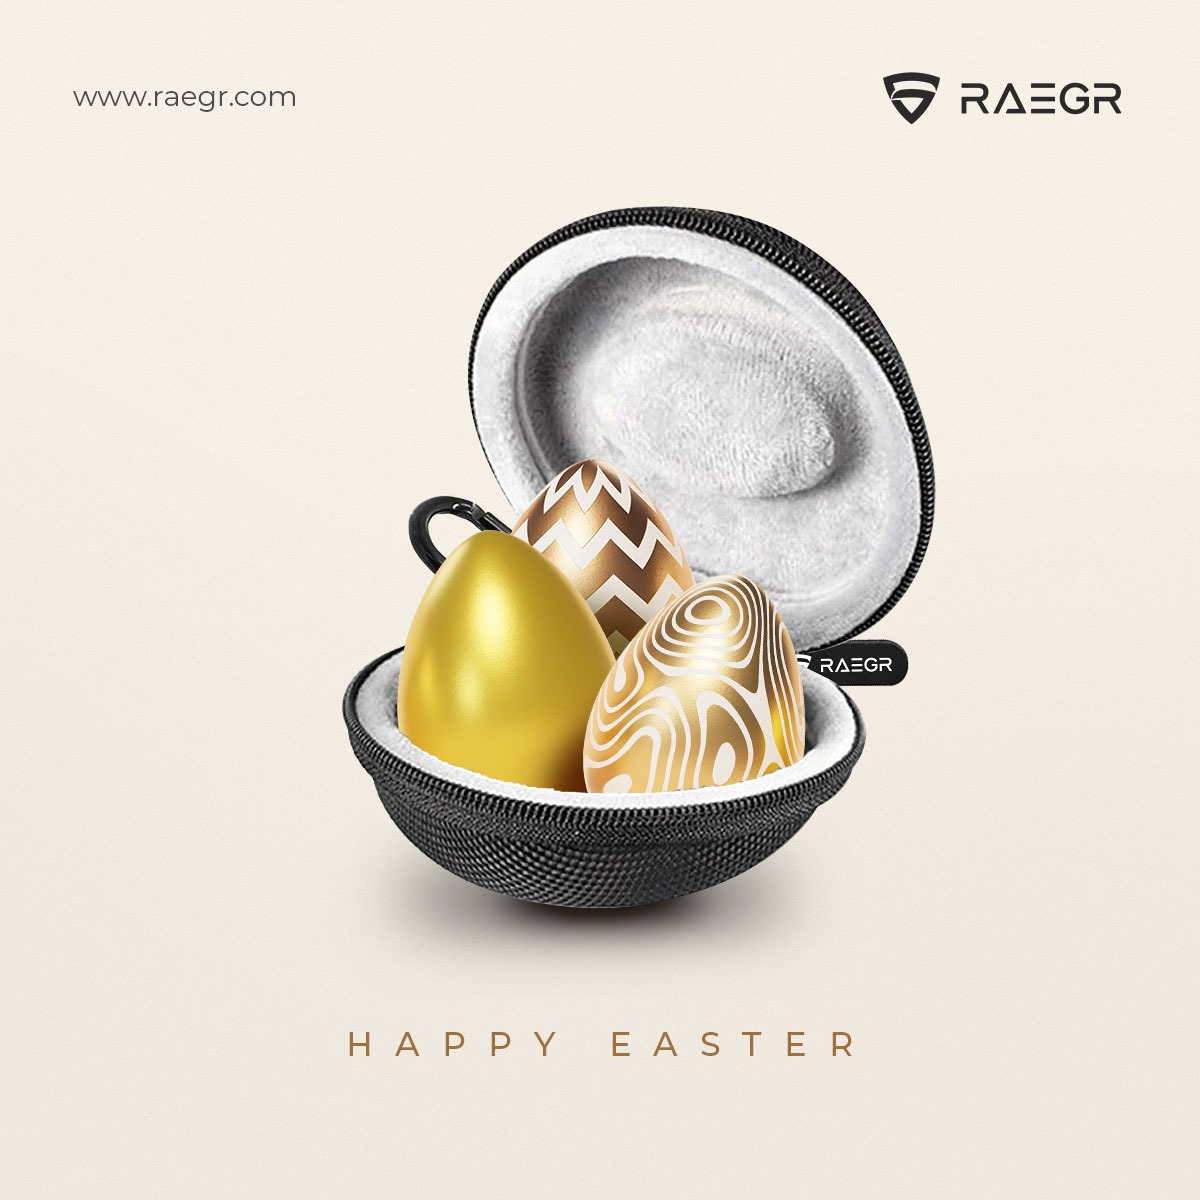 Wishing you and your loved ones an Egg-cellent Easter!

#RAEGR #HappyEaster EasterBlessings #EasterCelebration #EasterSunday #EasterTraditions #SpringtimeCelebration #EasterEggs #EasterBunny #FamilyGathering